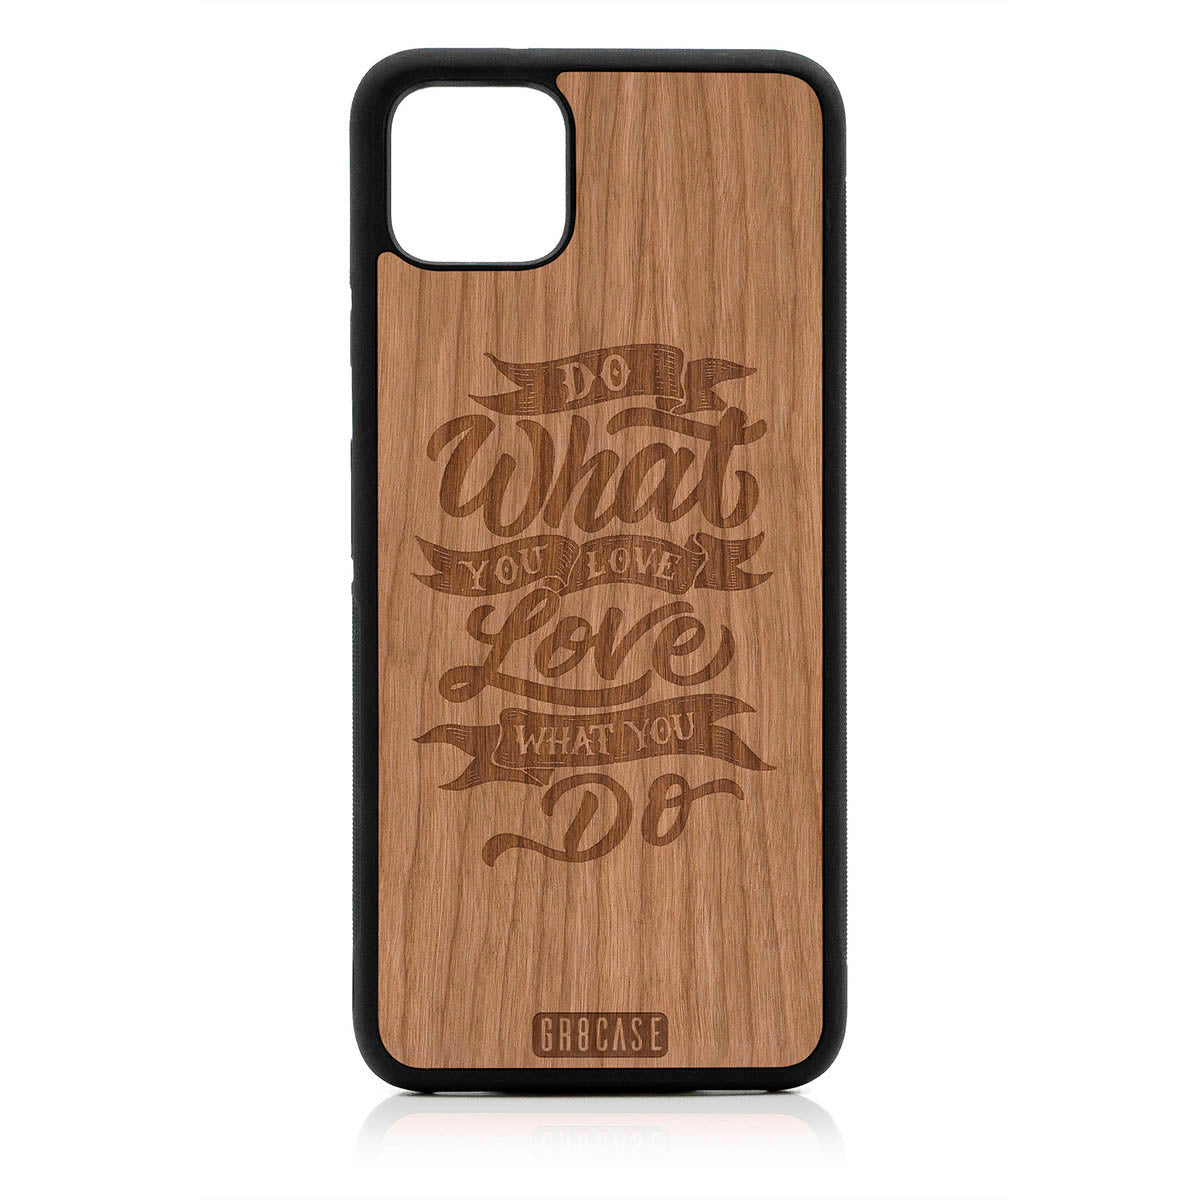 Do What You Love Love What You Do Design Wood Case For Google Pixel 4XL by GR8CASE